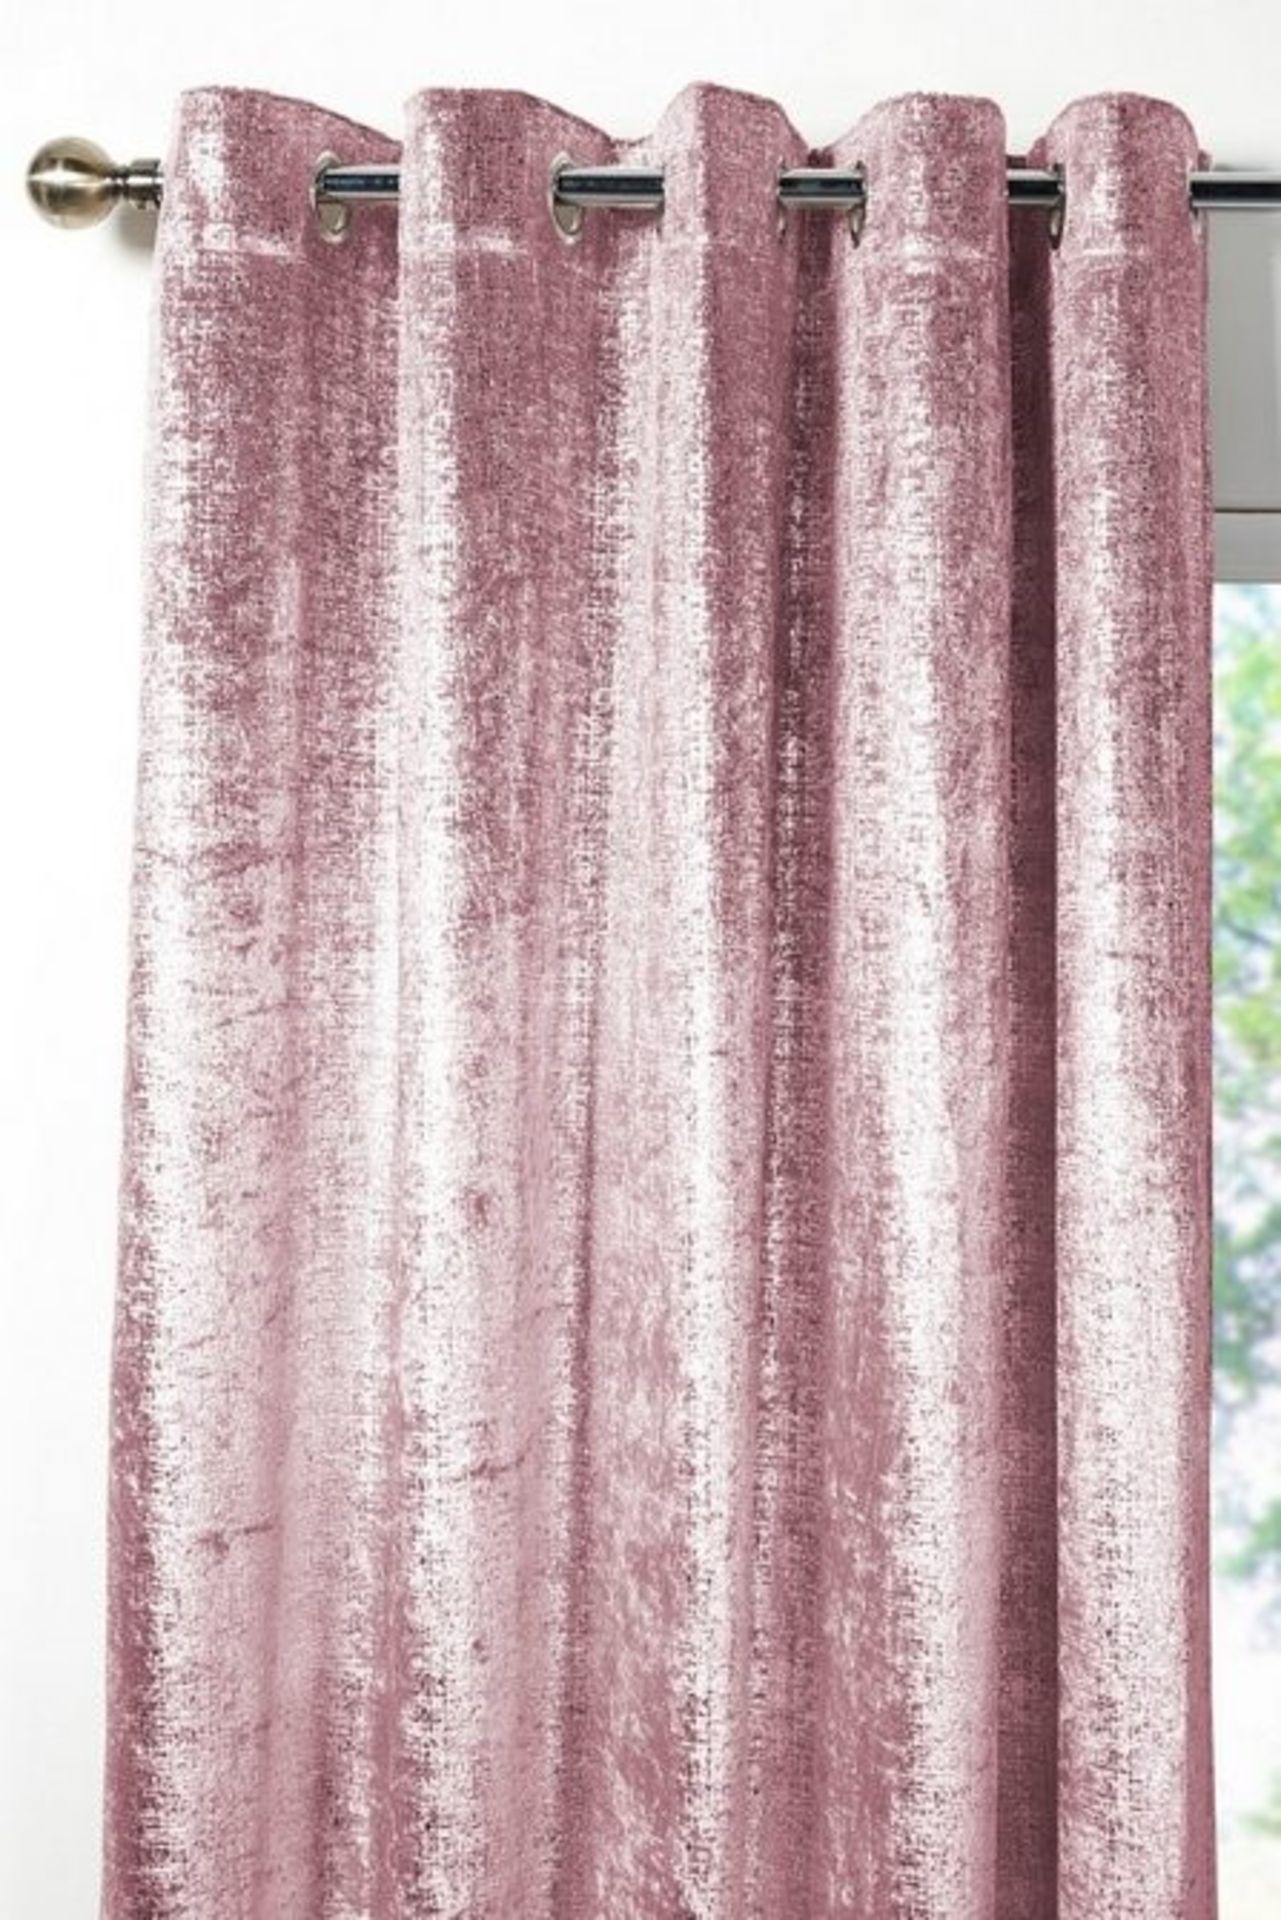 1 BAGGED PAIR OF VENUS METALLIC VELVET CURTAINS / 66 X 90 / RRP £54.99 (PUBLIC VIEWING AVAILABLE)